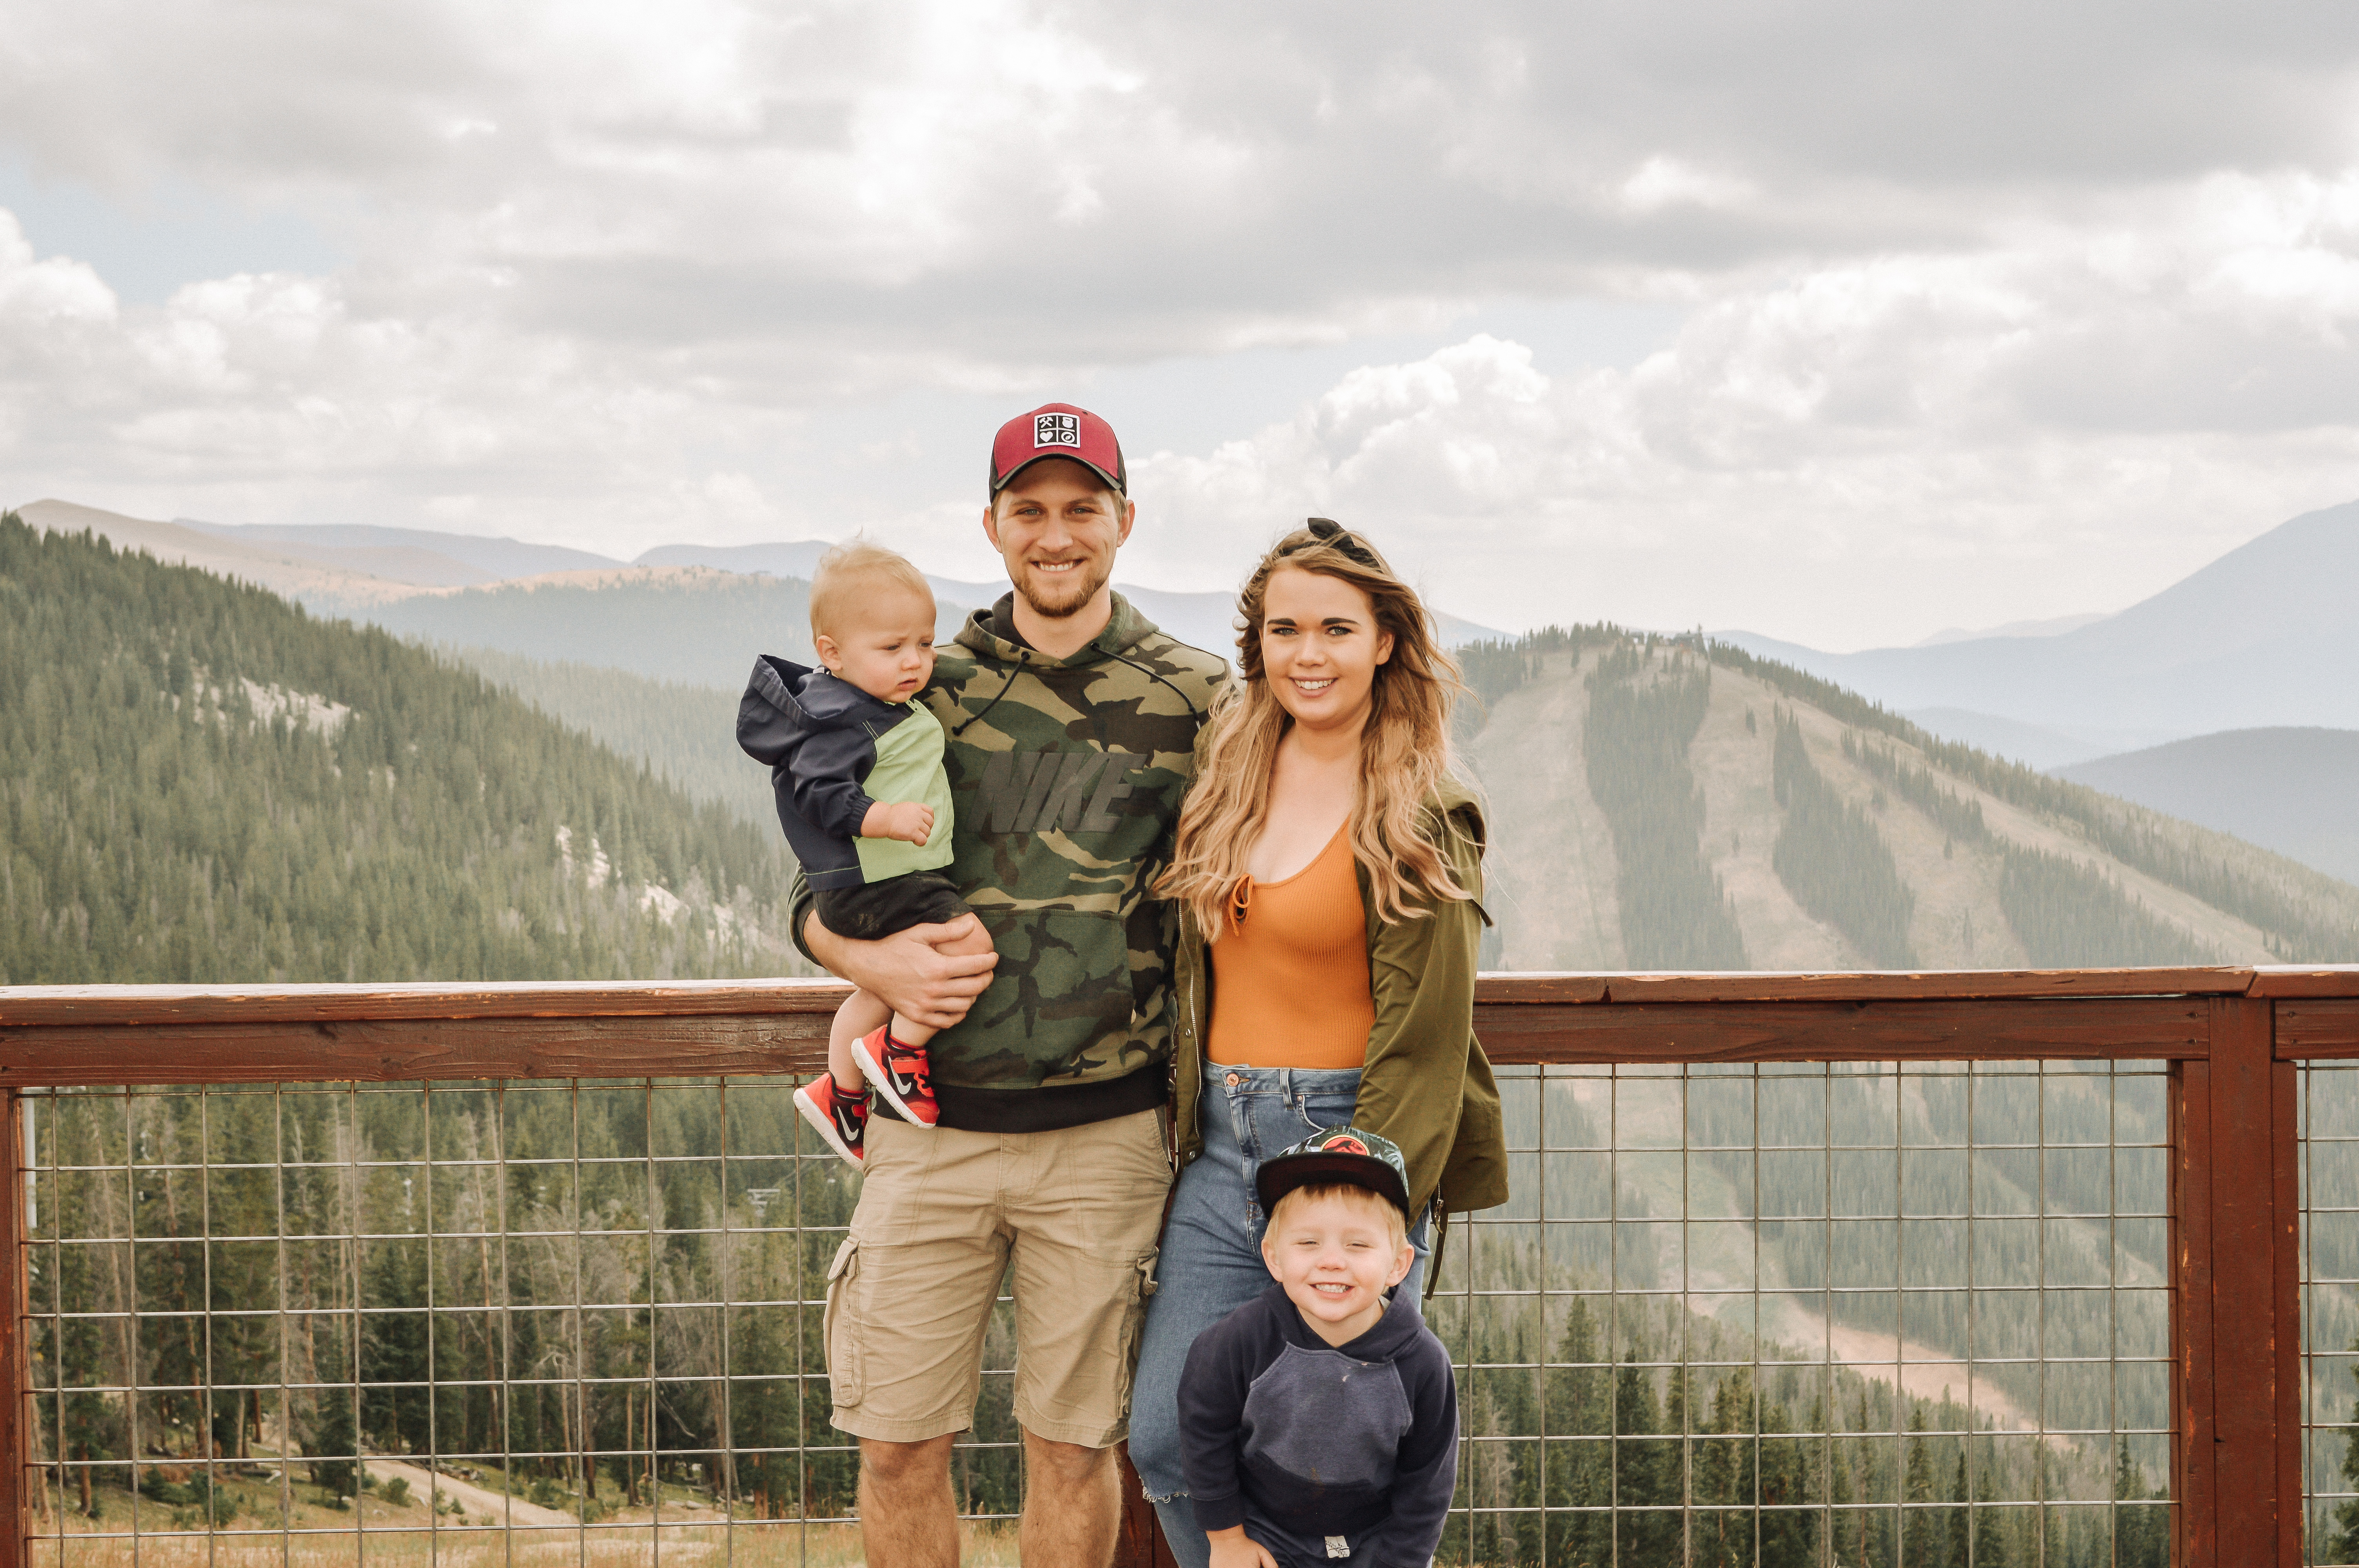 The Best Things to Do in Keystone CO featured by popular Denver travel blogger, All Things Lovely